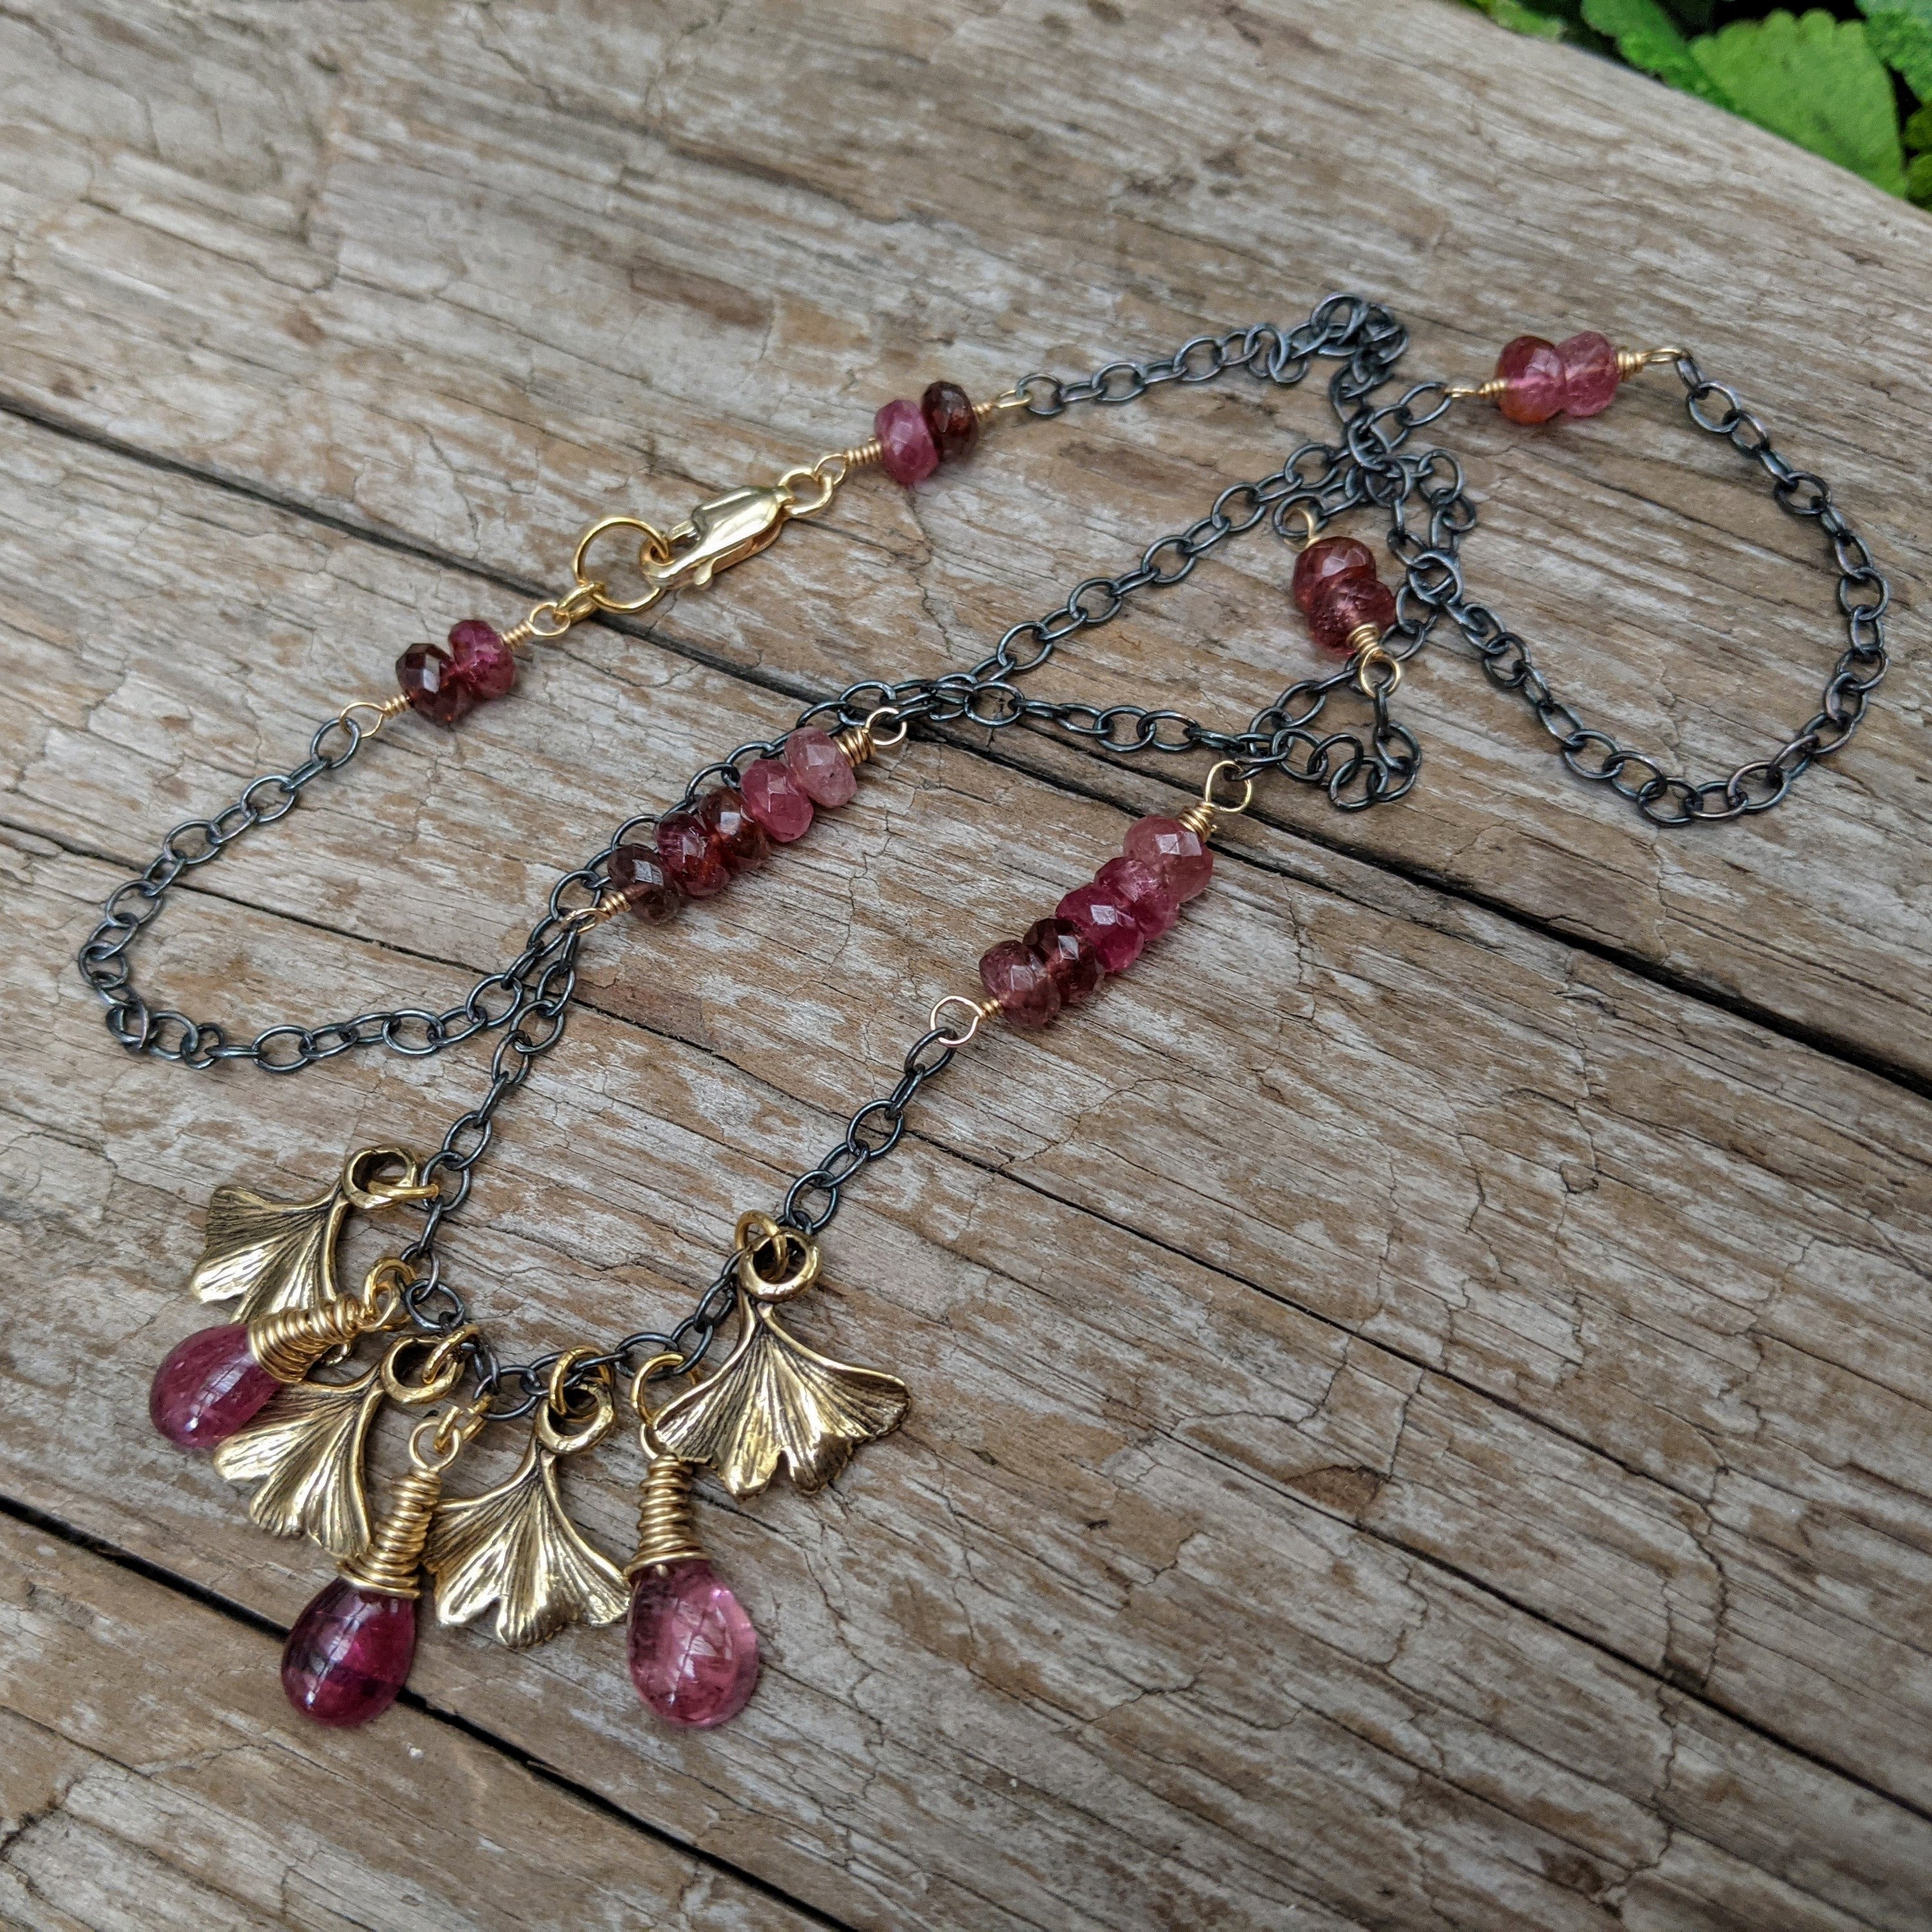 Artisan Necklace. Mix metal necklace. Pink tourmaline necklace. Boho necklace, bohemian jewelry. Handcrafted by Aurora Creative Jewellery.